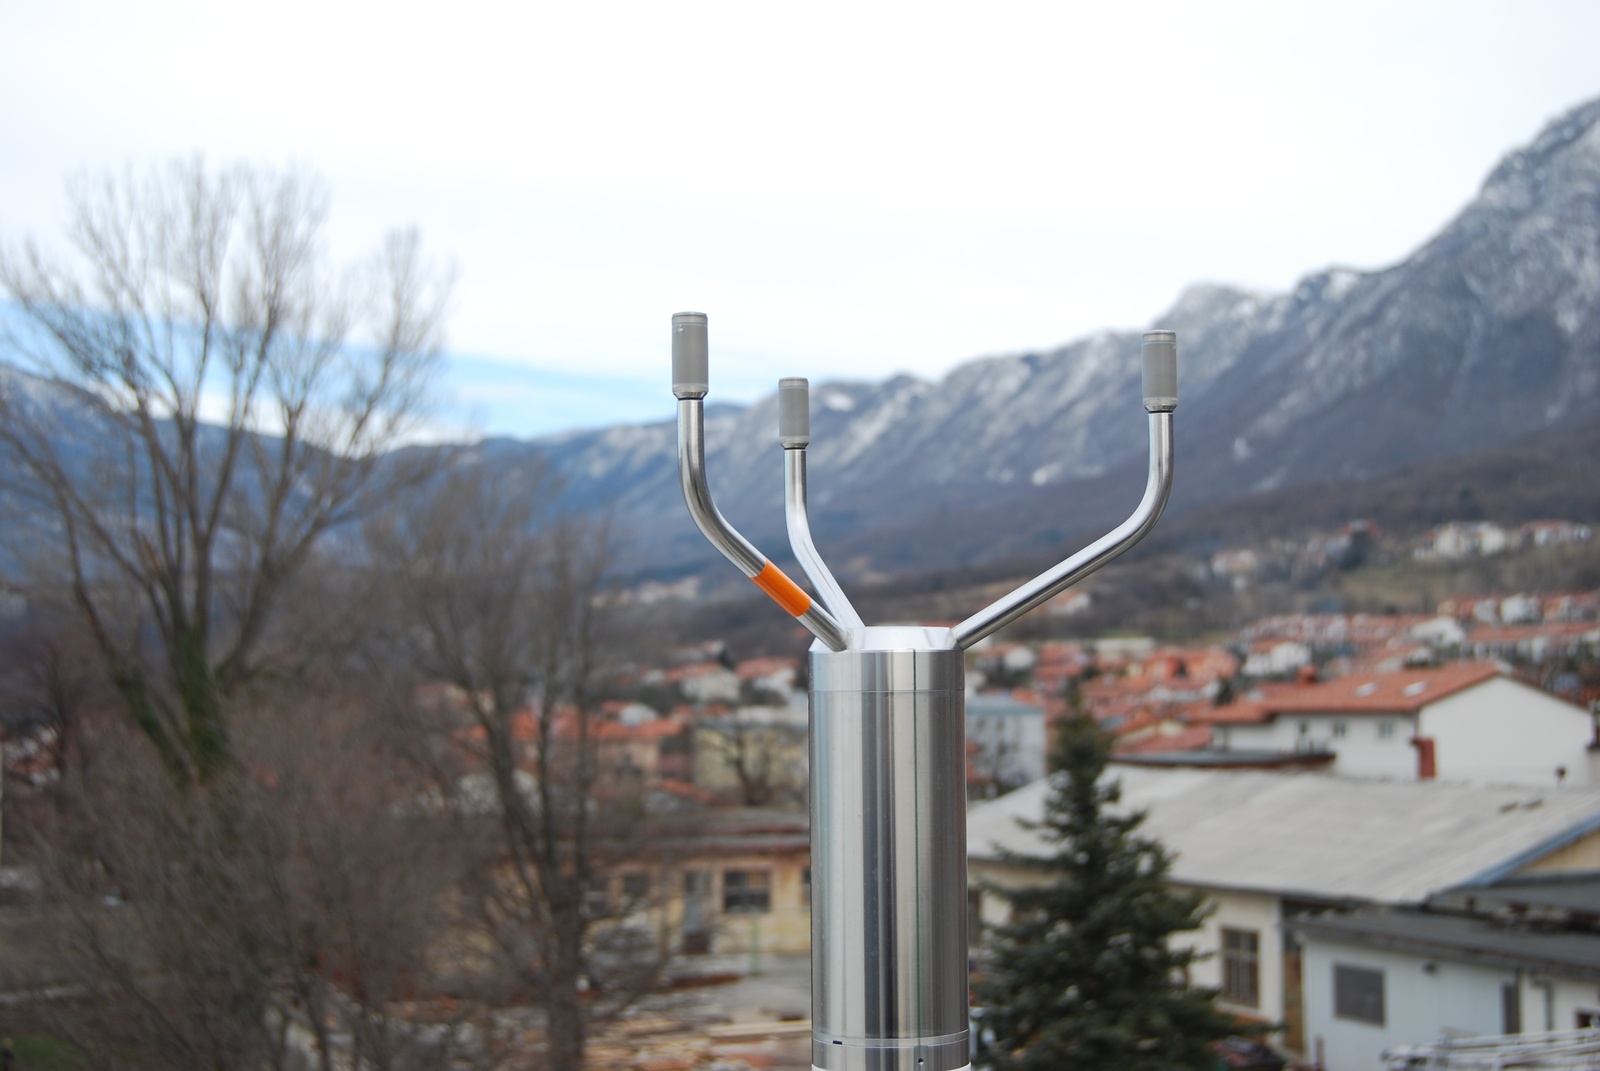 An ultrasonic anemometer, mounted on the roof of the University of Nova Gorica  at Ajdovščina, which provides data on wind speed and direction up to four times per second.